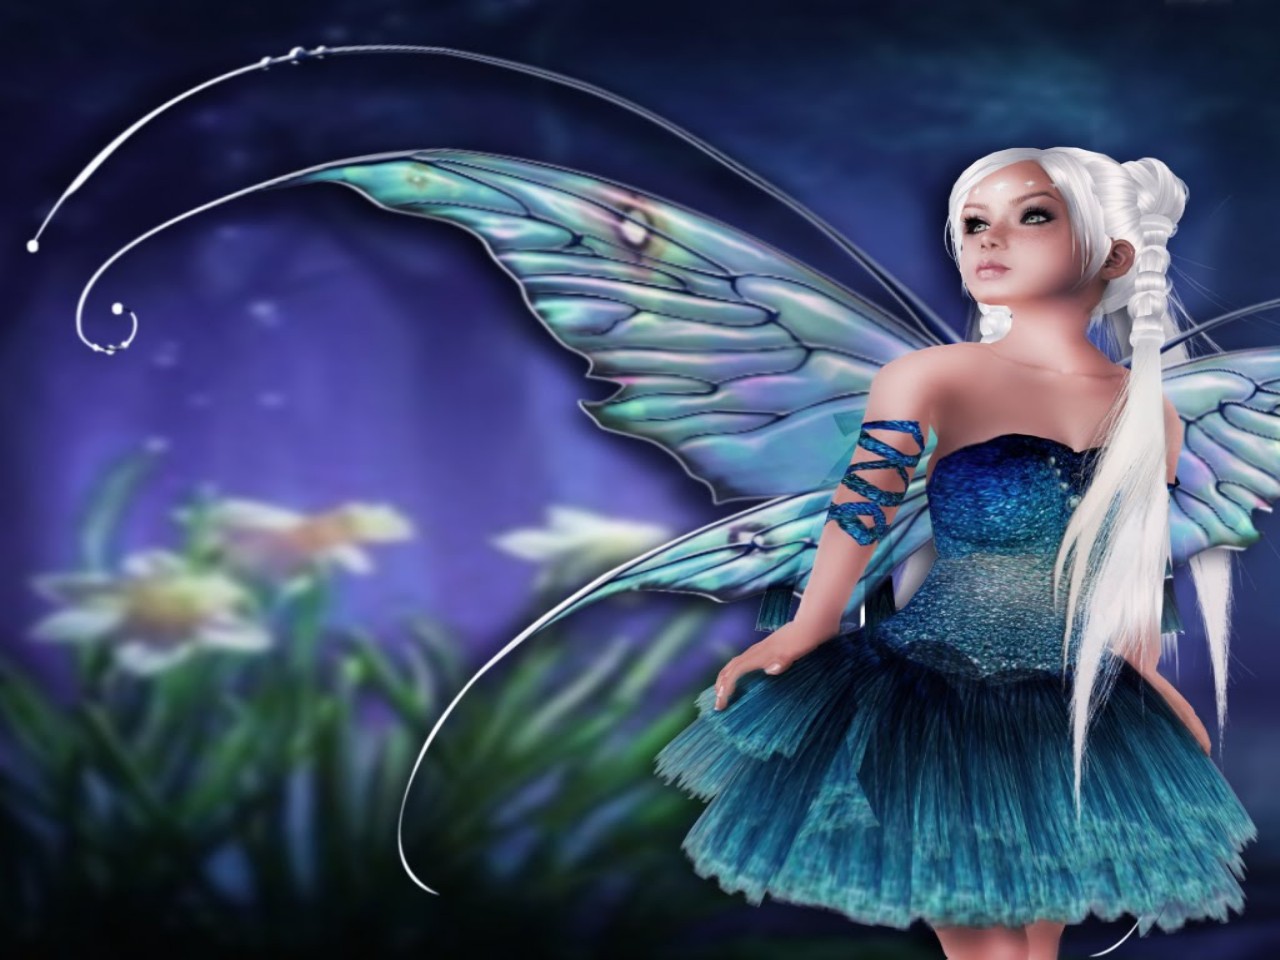 Fantasy Fairies Wallpaper Which Is Under The